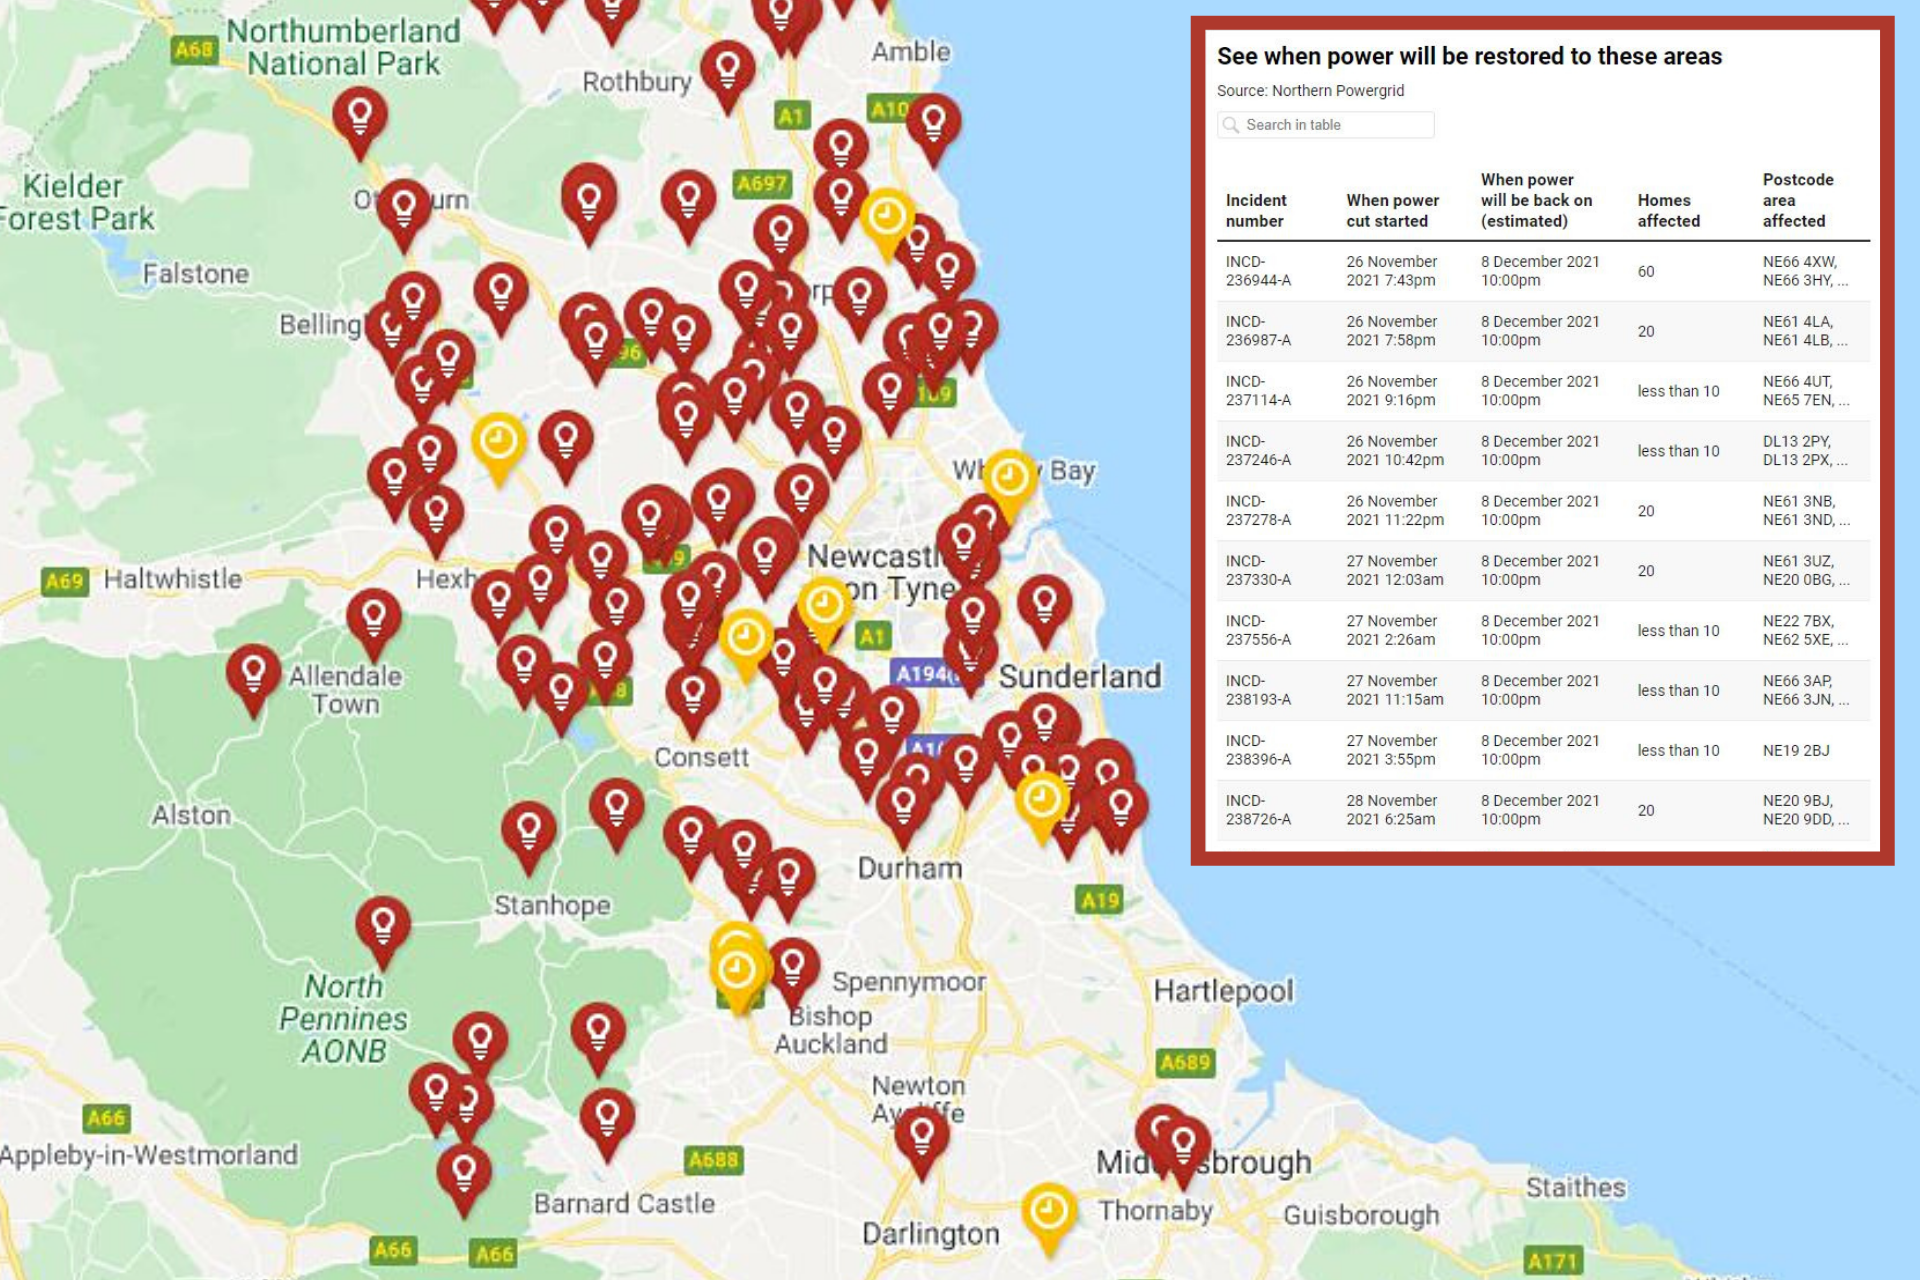 Northern Powergrid map shows North East areas still without power on day 11